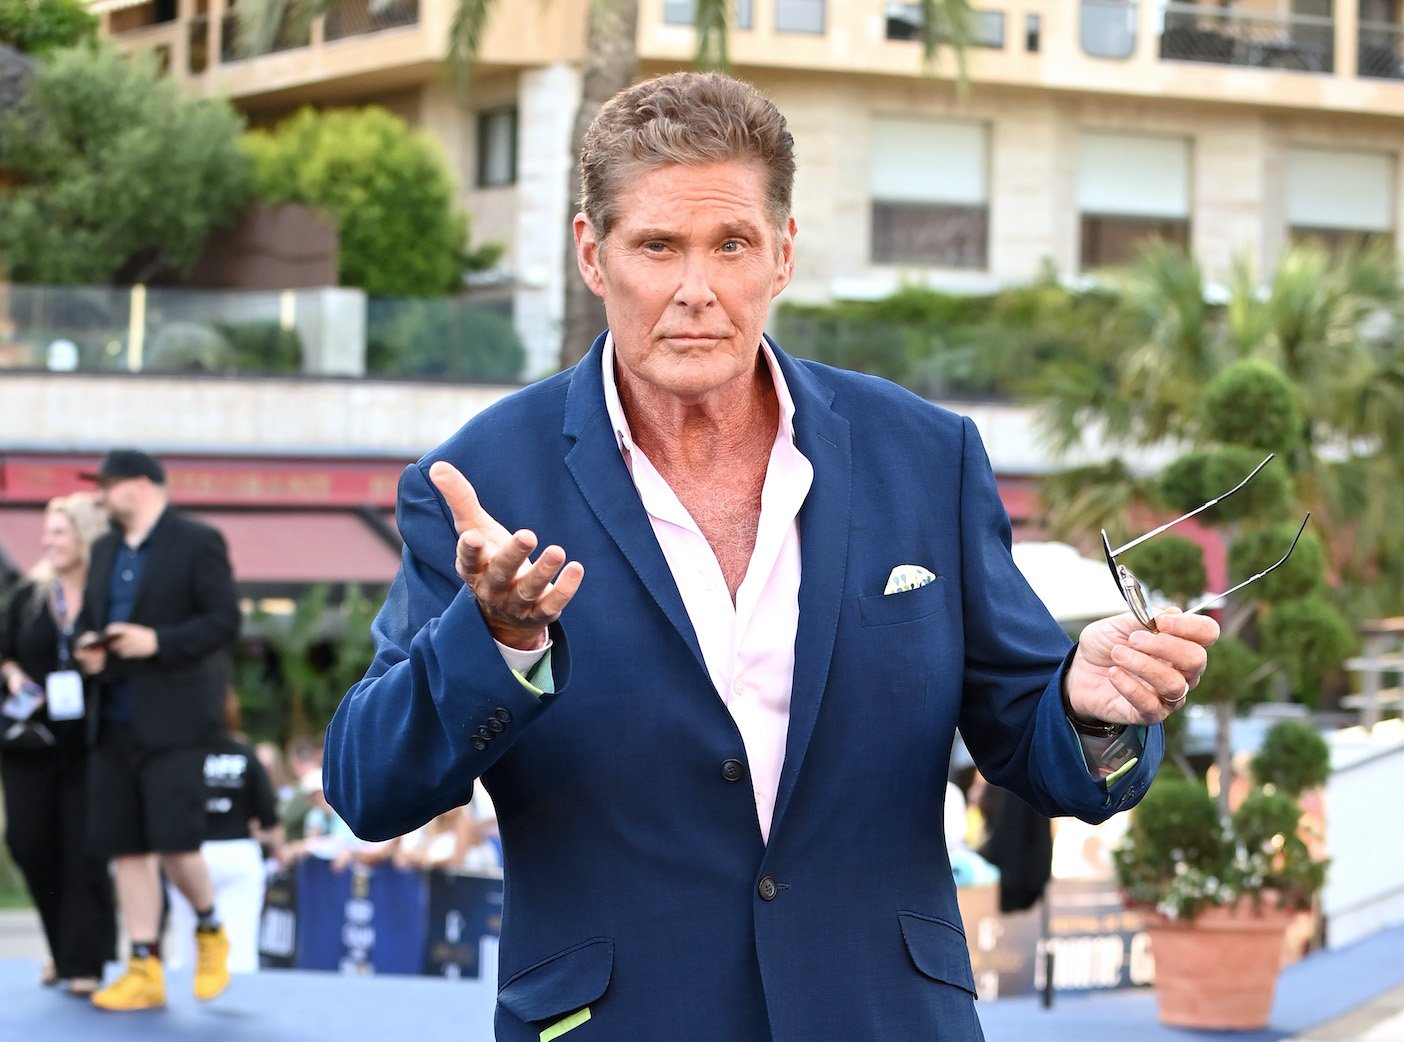 David Hasselhoff, a dubious source, reportedly needs plastic surgery after his 70th birthday